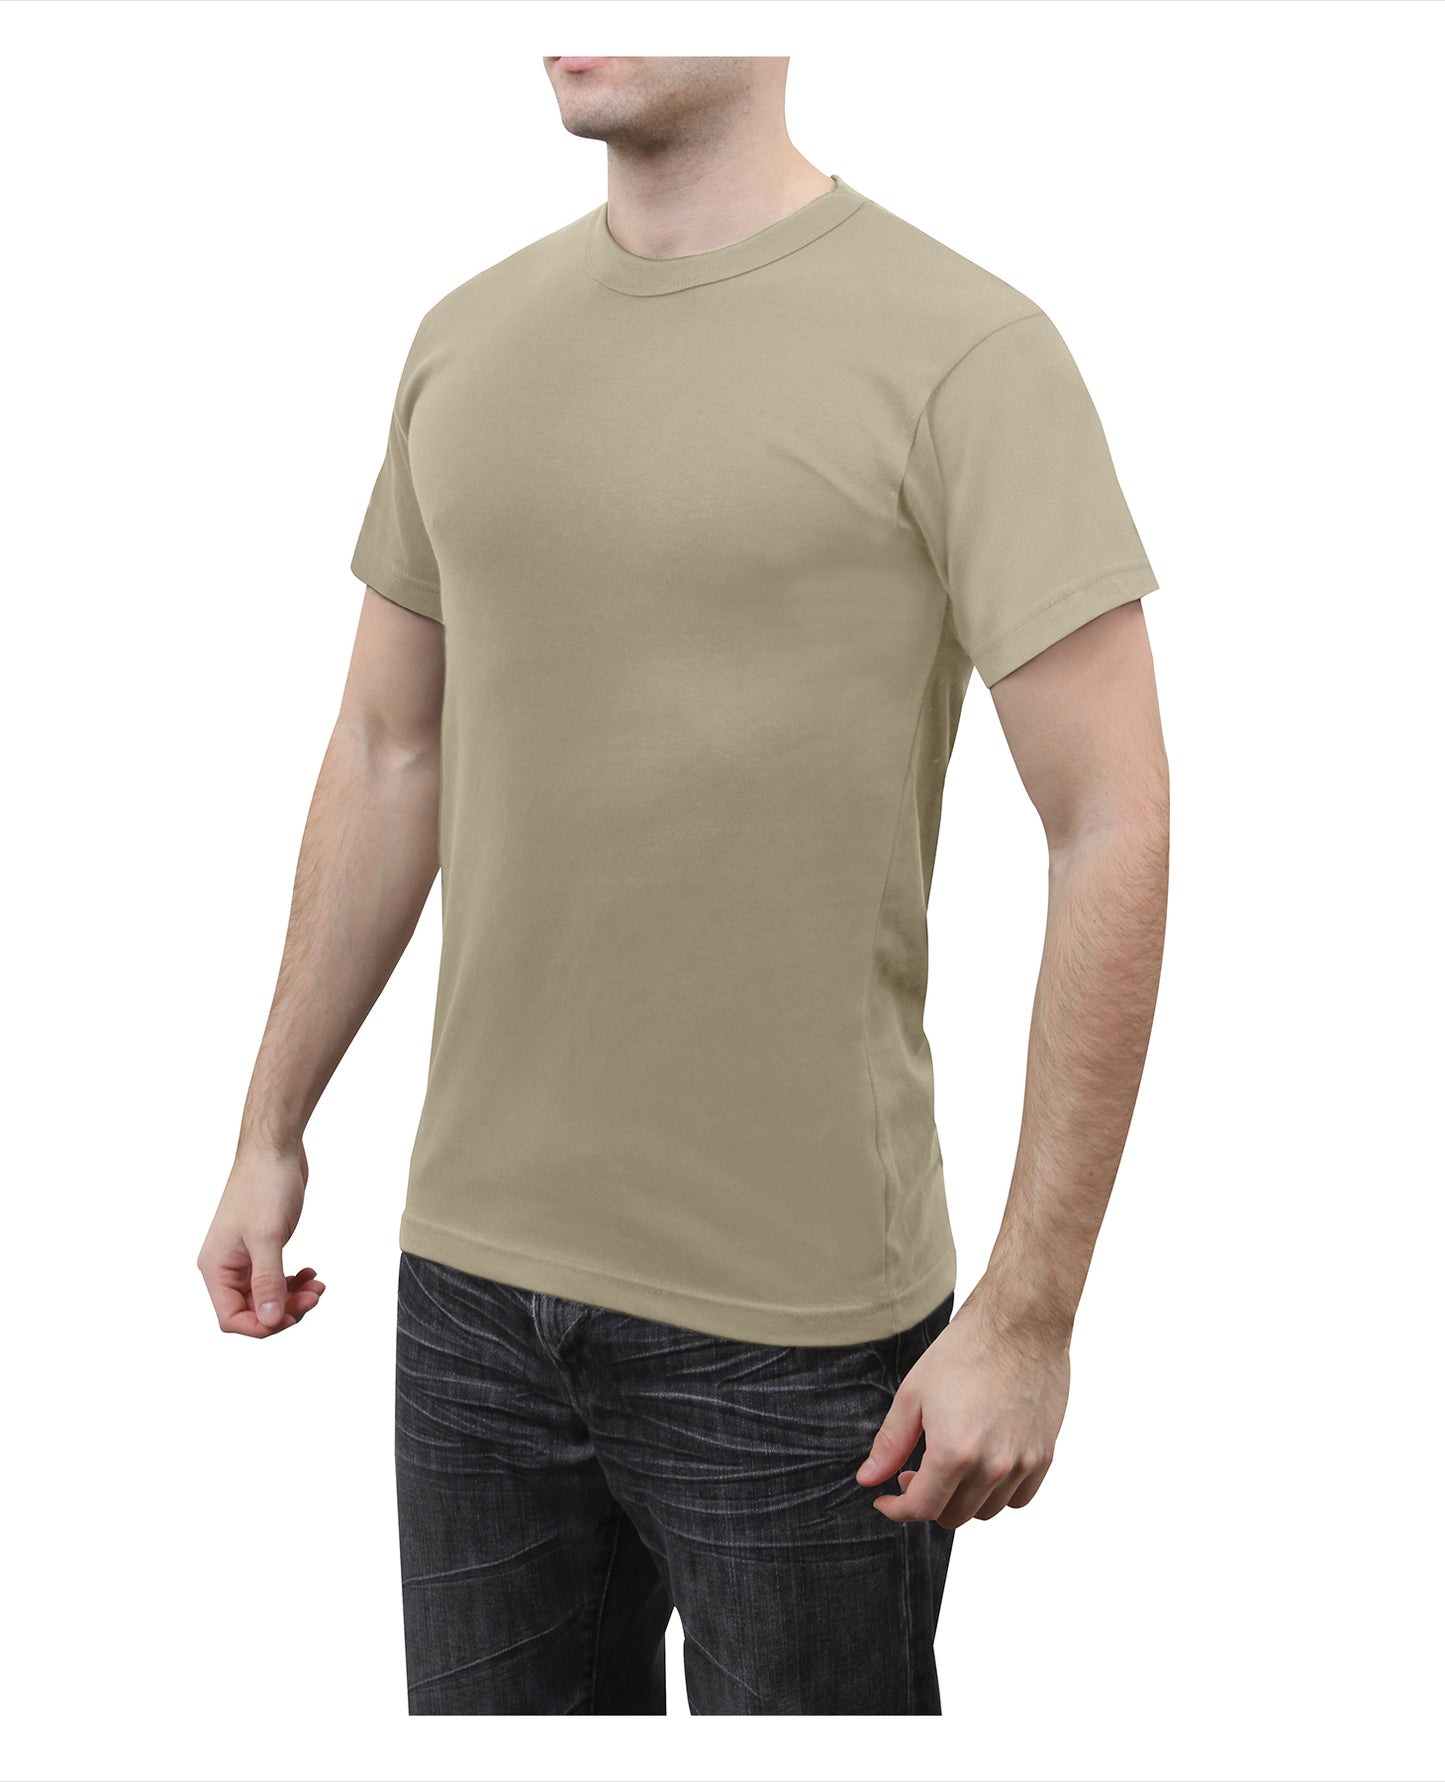 Rothco Solid Color 100% Cotton T-Shirt - Military Colors